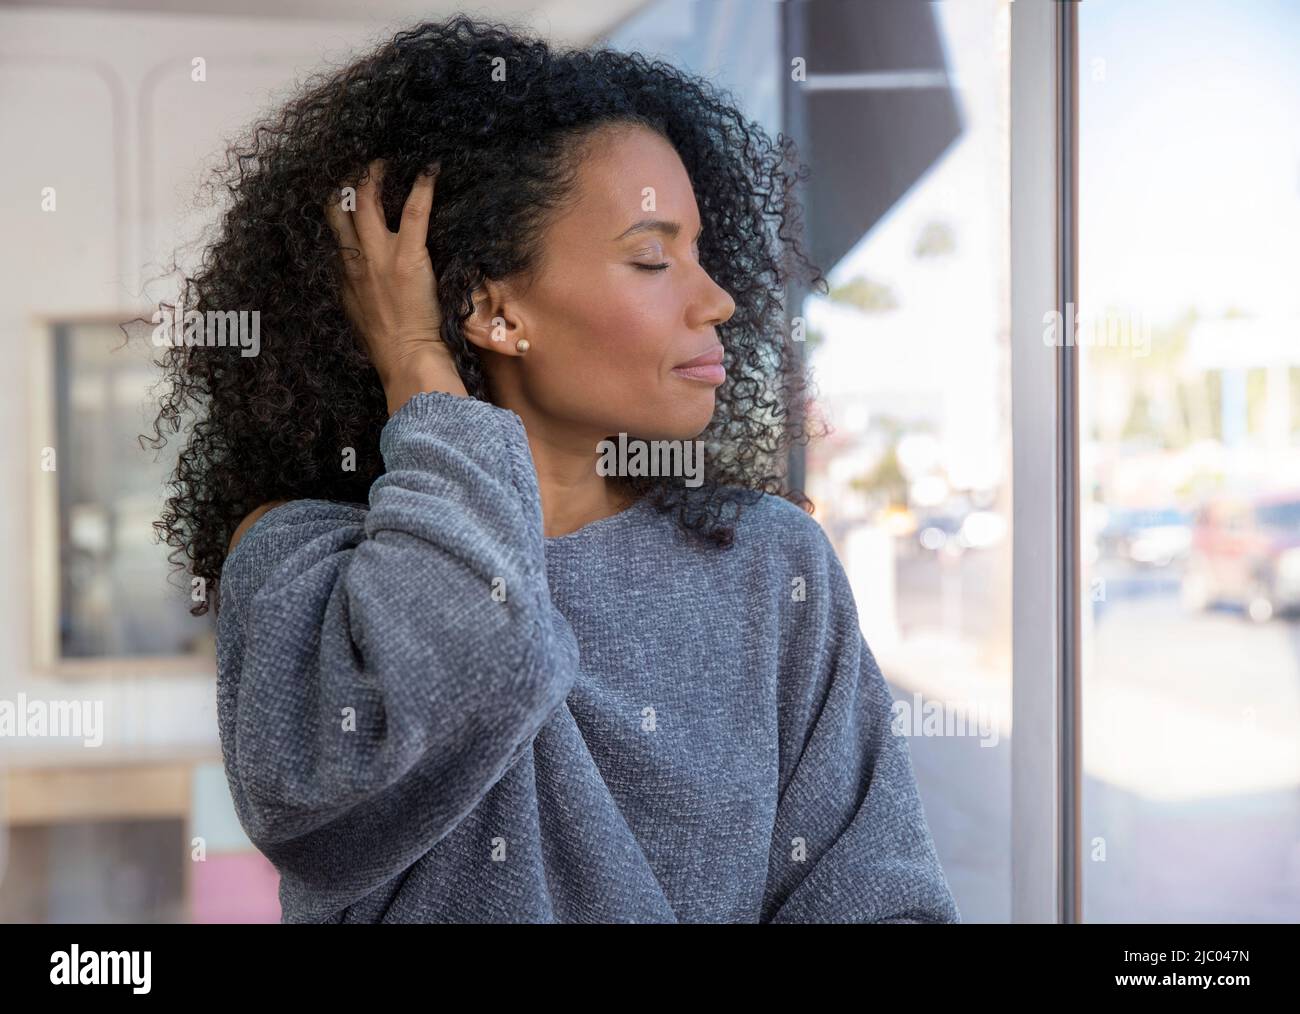 Mixed race, middle-aged woman runs her hands through her hair with her eyes closed looking out a window. Stock Photo